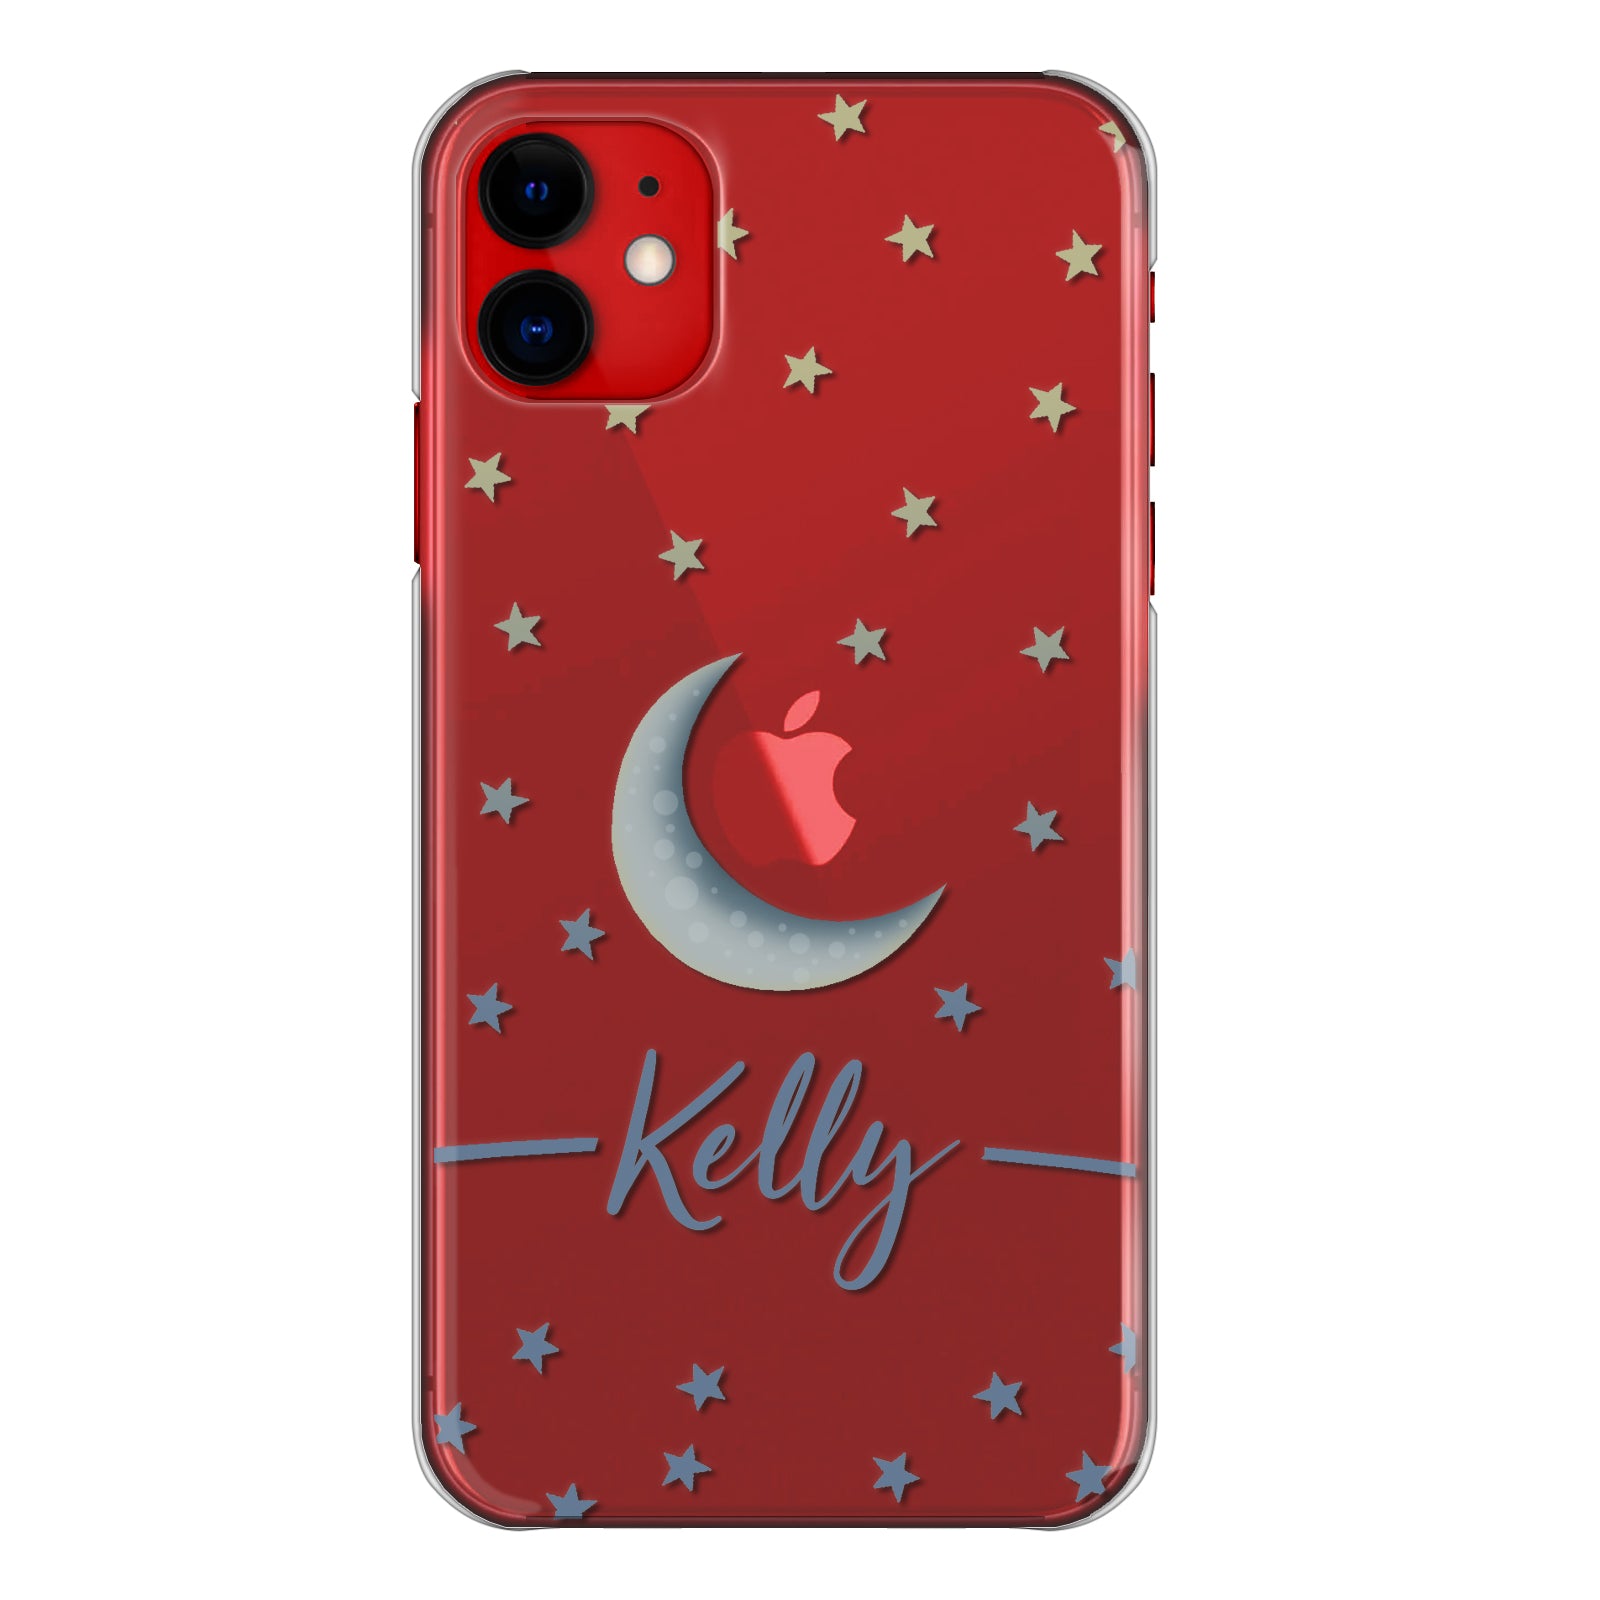 Personalised Honor Phone Hard Case with Crescent Moon, Stars and Stylish Grey Text